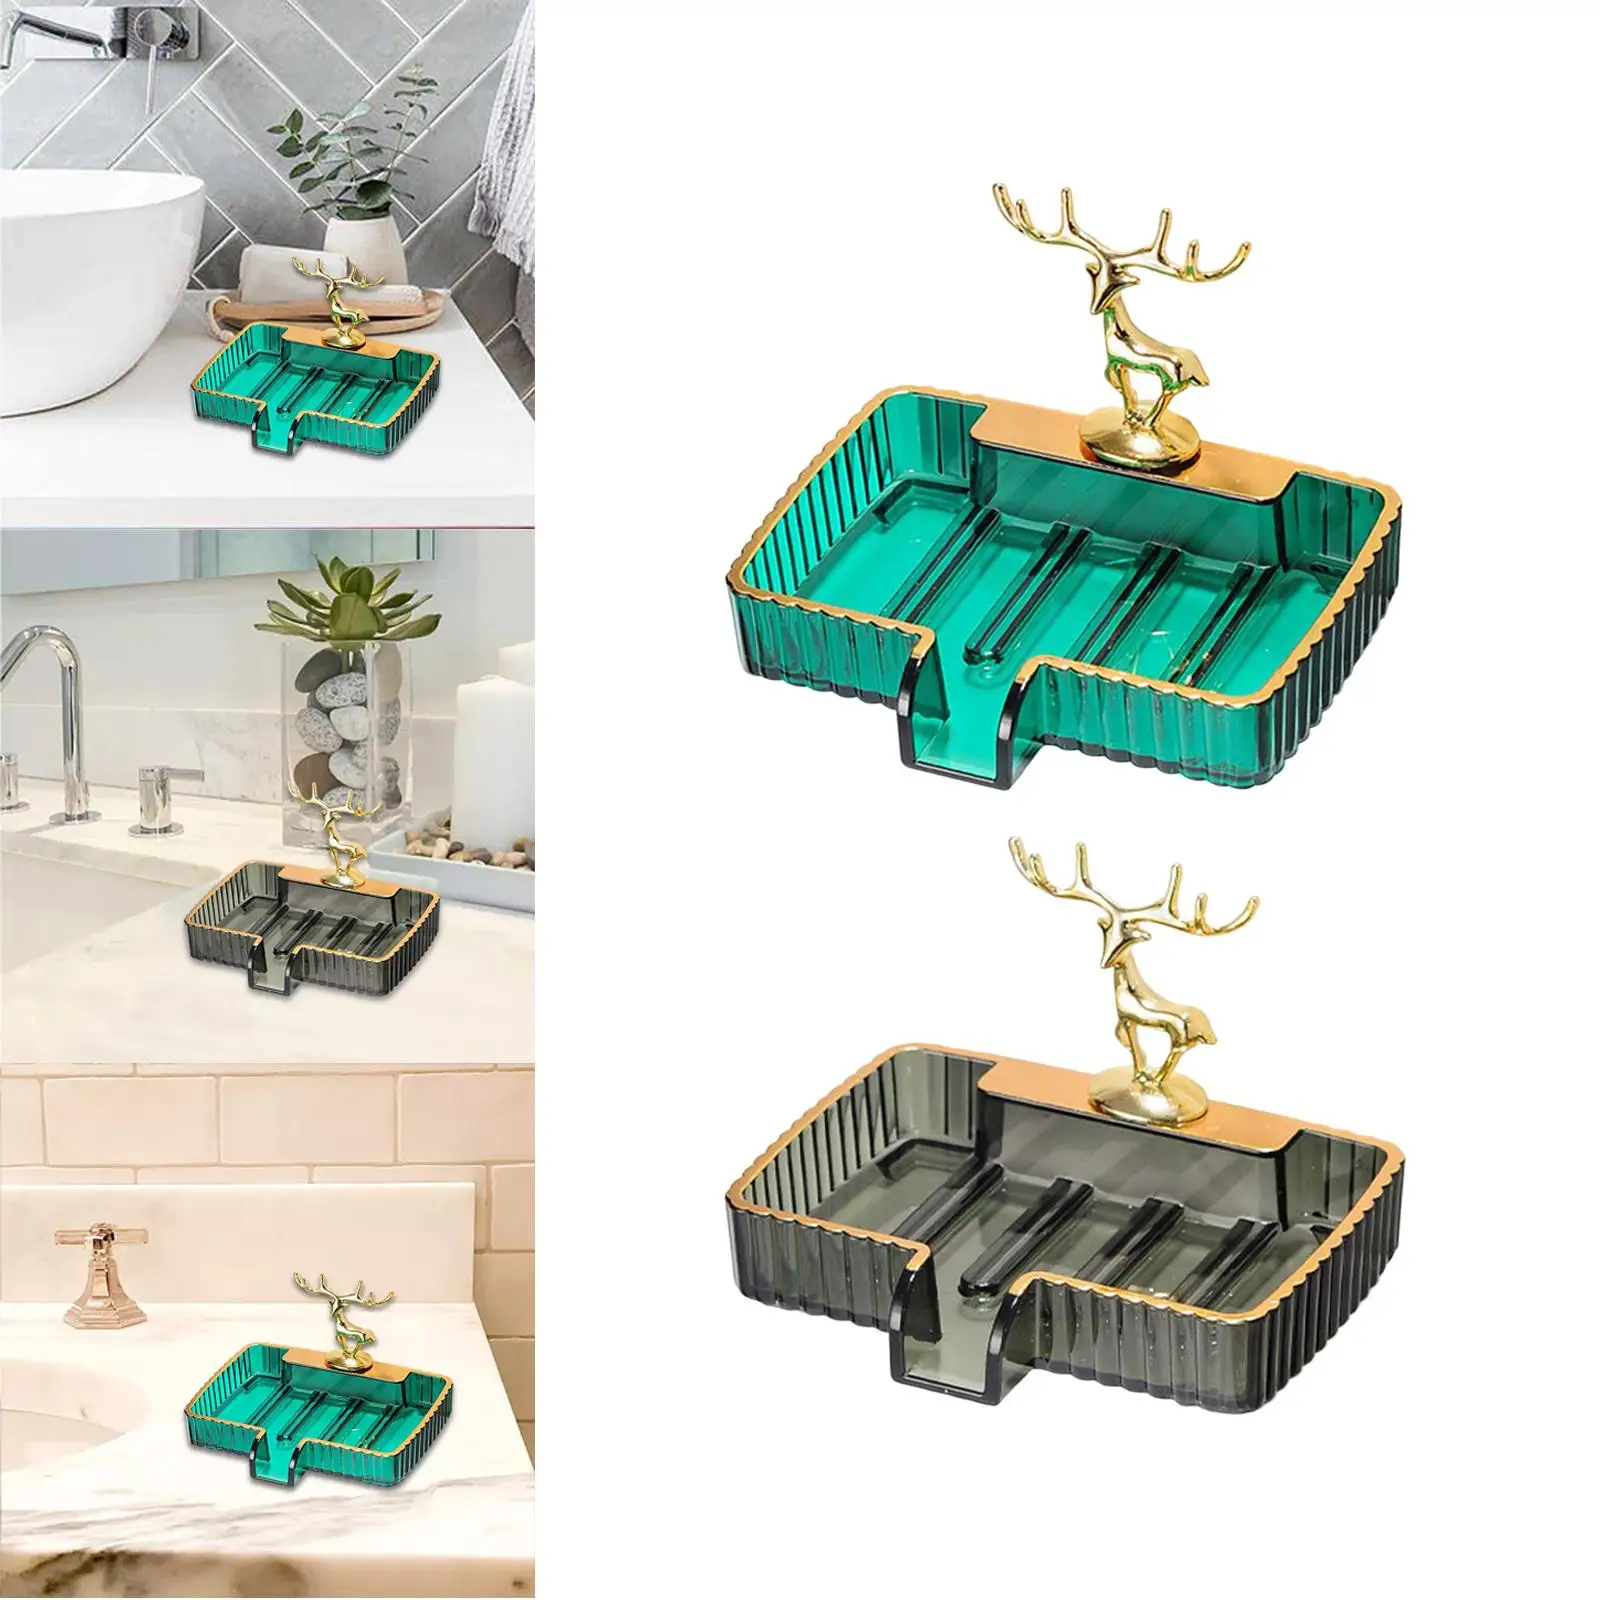 Portable Soap Dish with Drain Easy Clean Durable Container Storage Box Self Draining Soap Holder for Shower Bathroom Bathtub